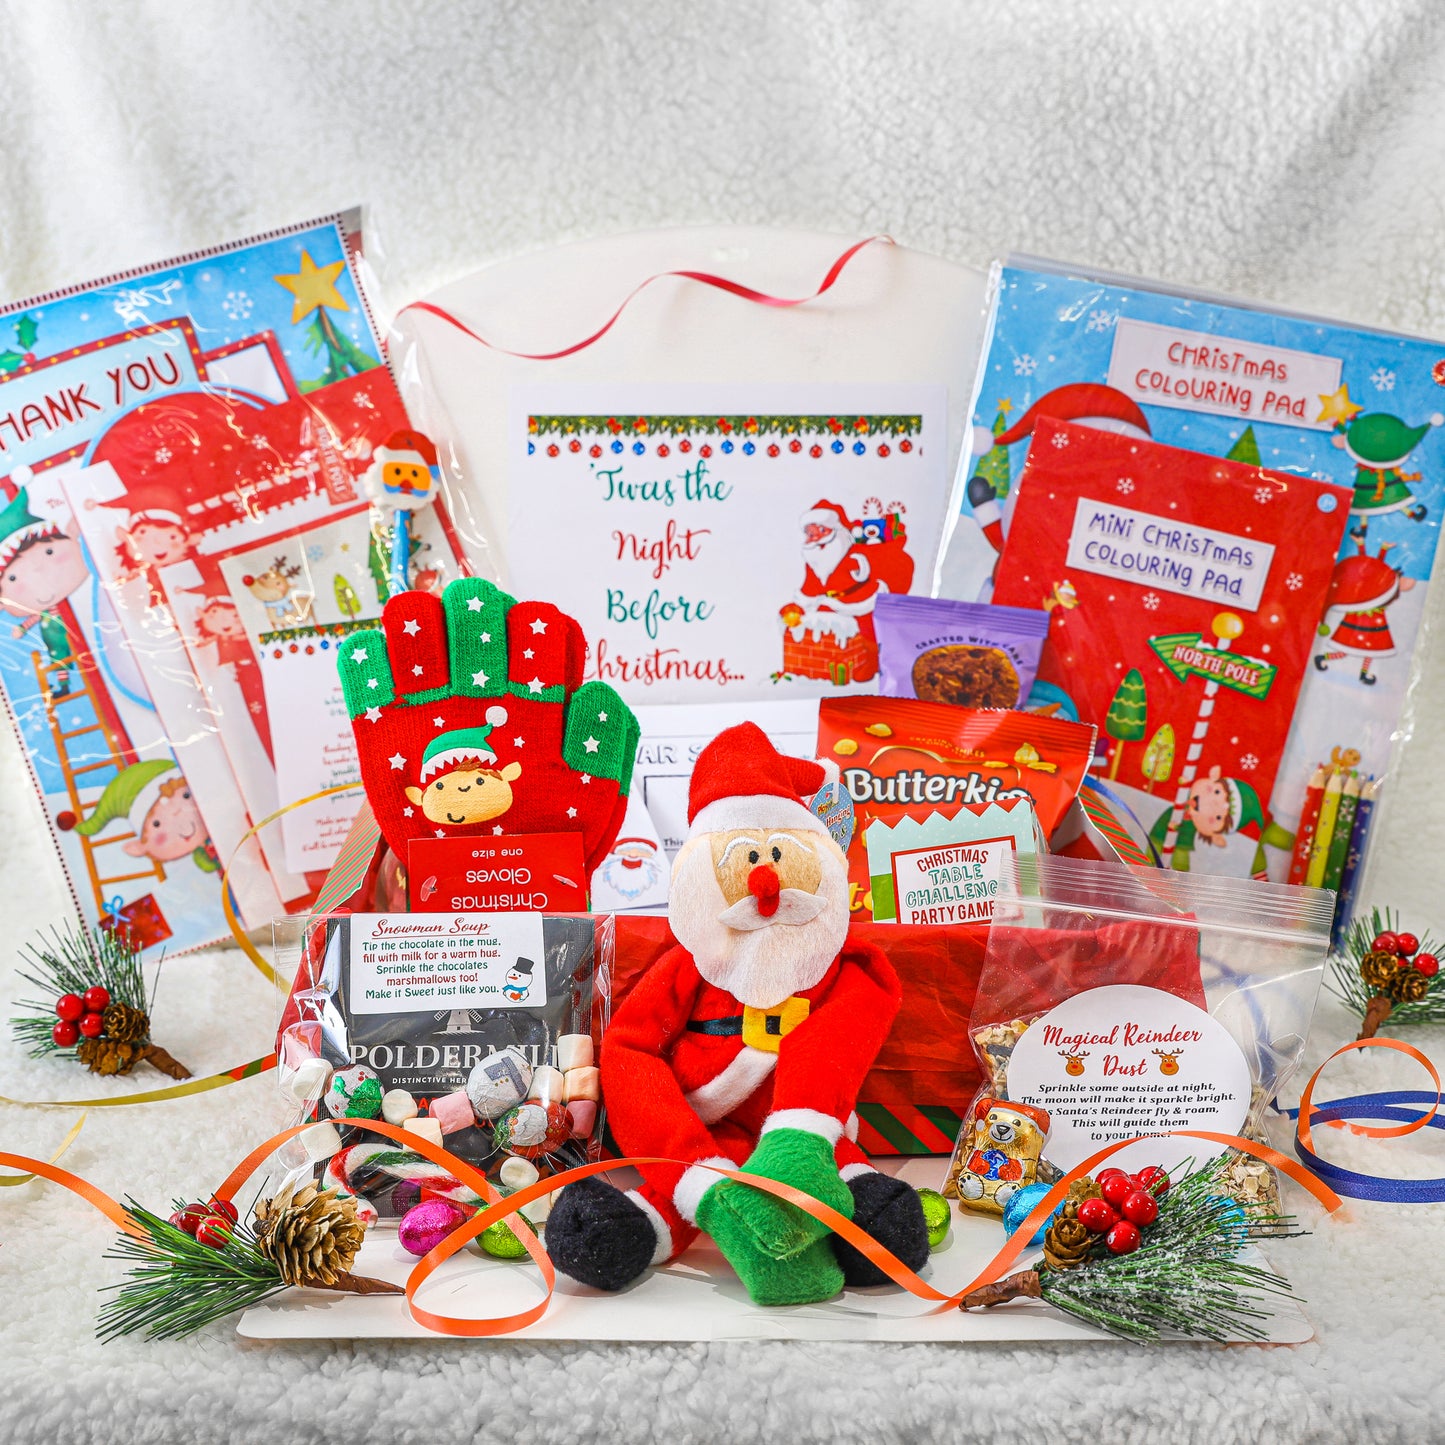 Personalised Christmas Eve Box Filled with Activities and Fun for Kids  - Always Looking Good -   